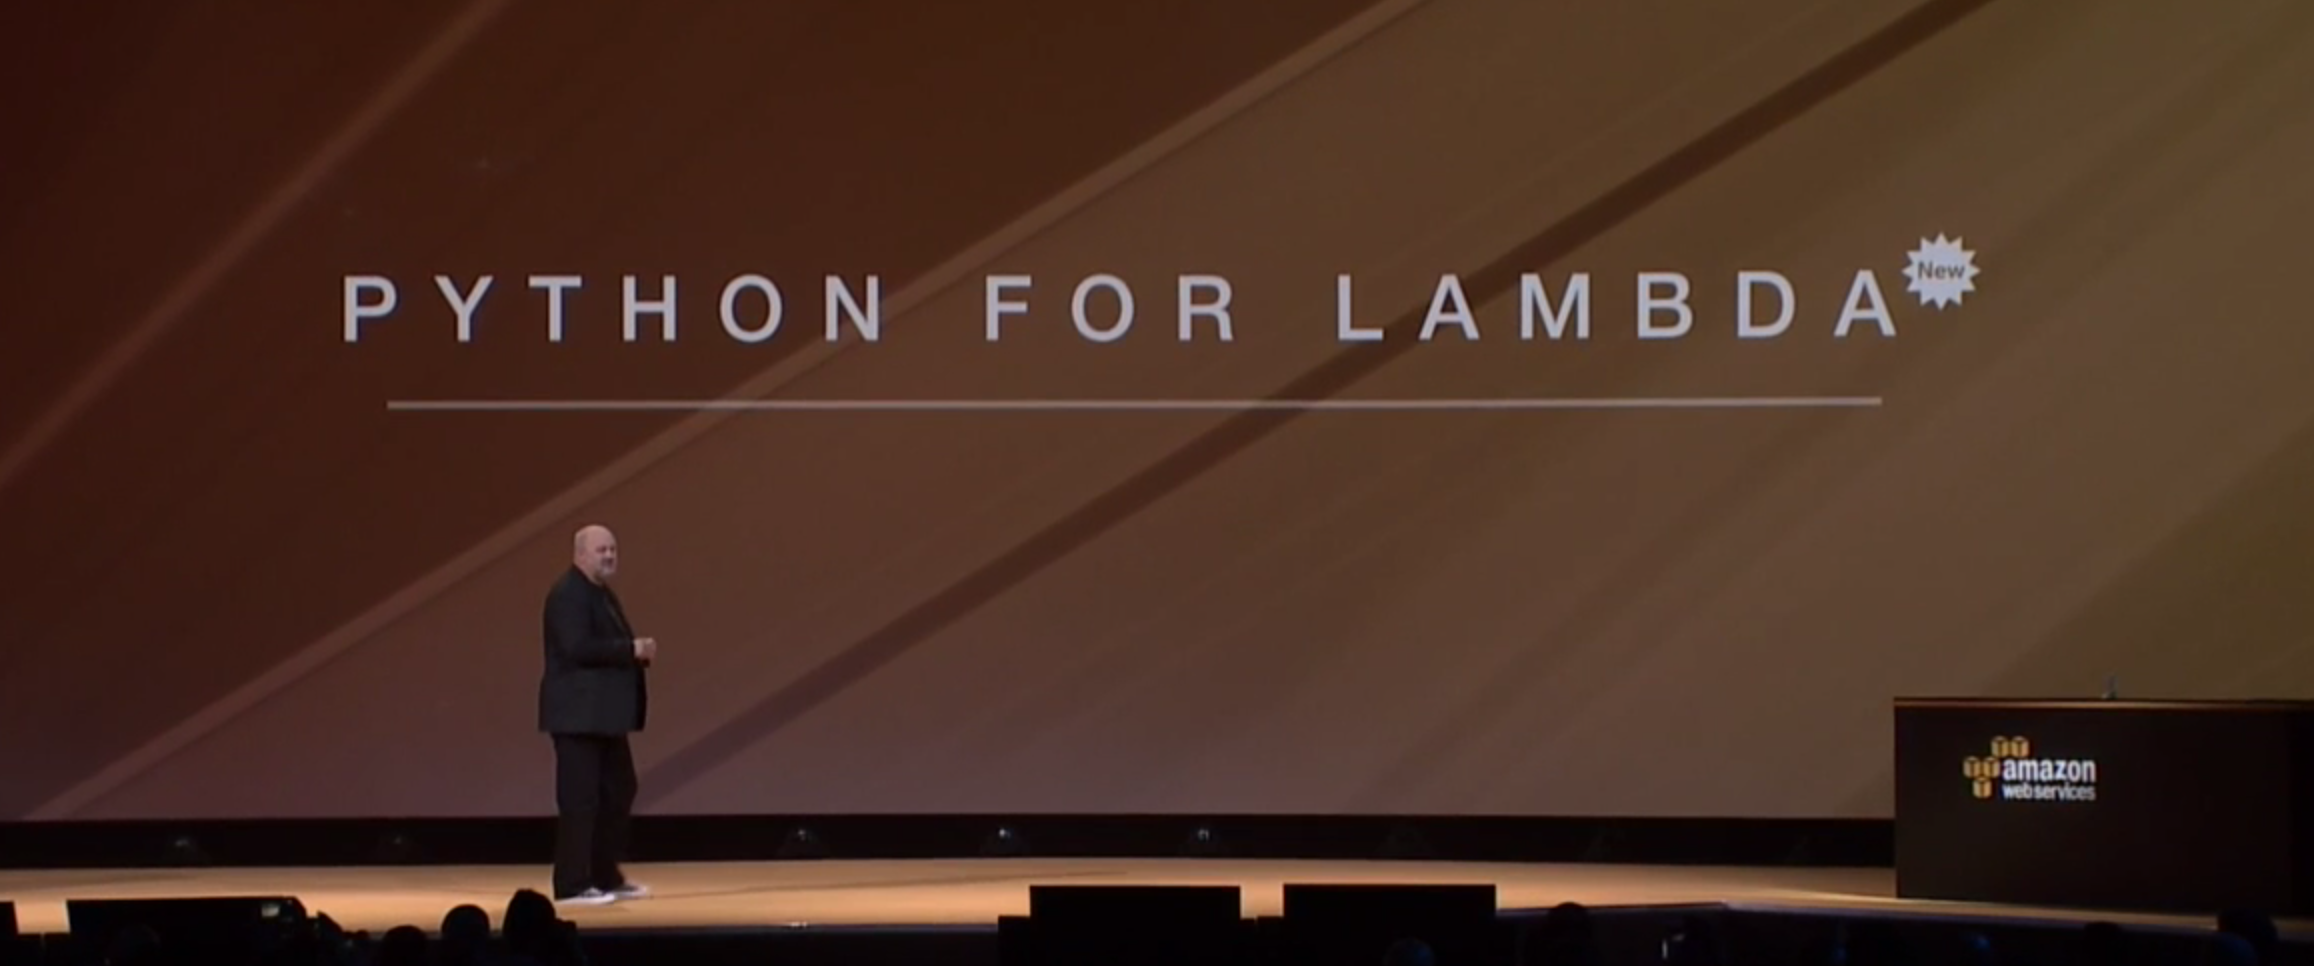 Amazon CTO Werner announced Python support for Lambda at the AWS re:Invent conference in Las Vegas on Oct. 8.